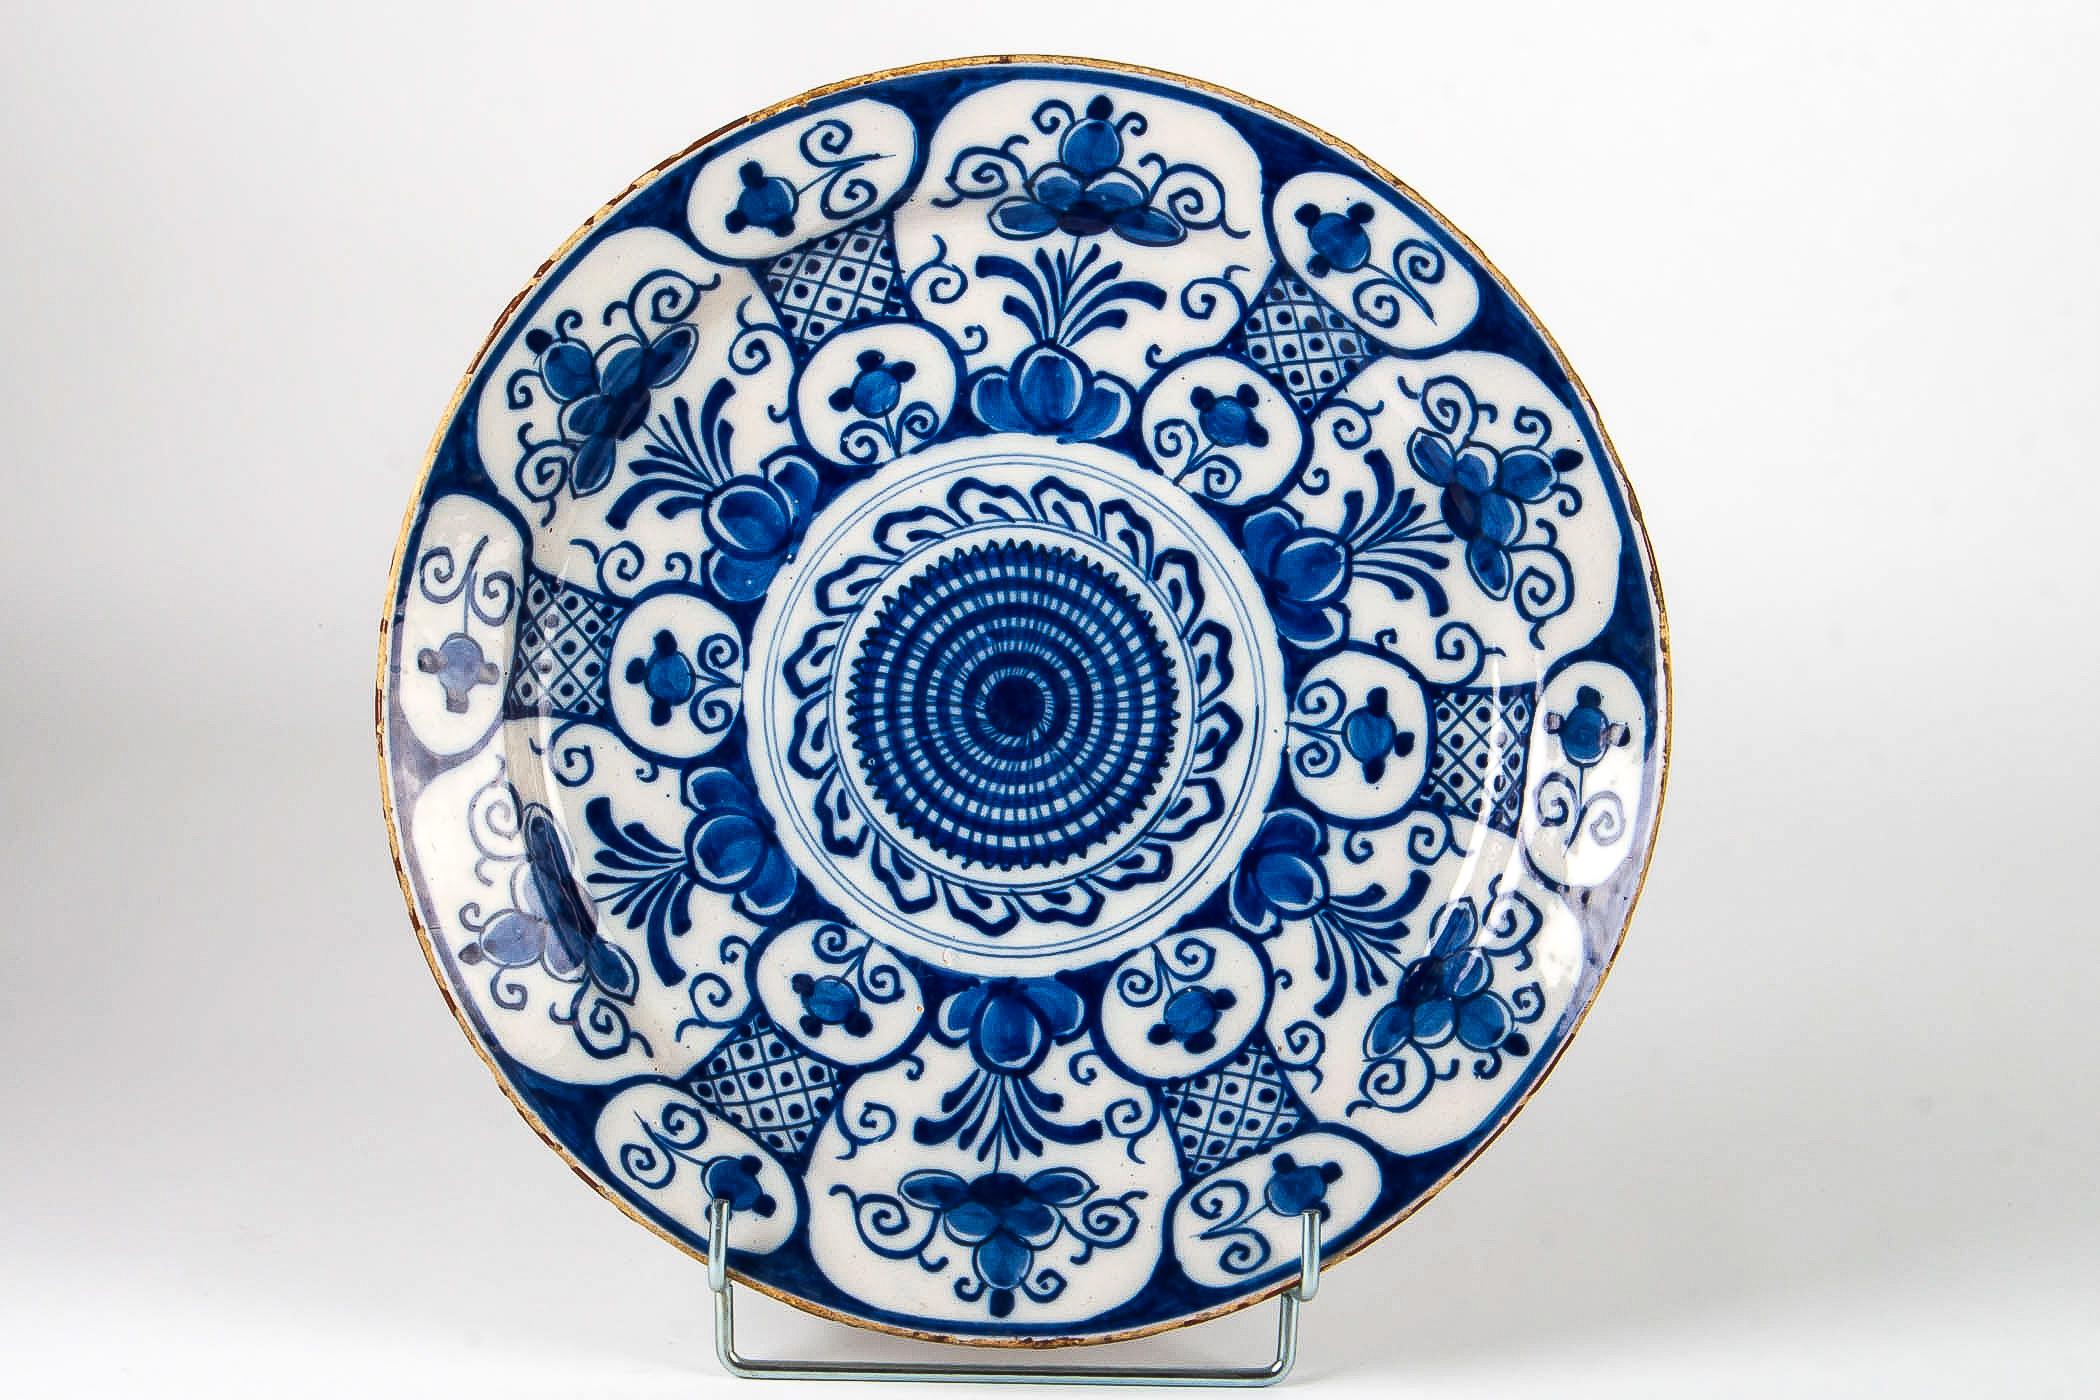 Mid-18th century, Delft Faience round dish, circa 1750

Elegant and decorative Delft Blue Cameo hand painted earthenware round dish, depicting rosettes and flowers.

Beautiful Dutch work, mid-18th century by the earthenware Delft factories,